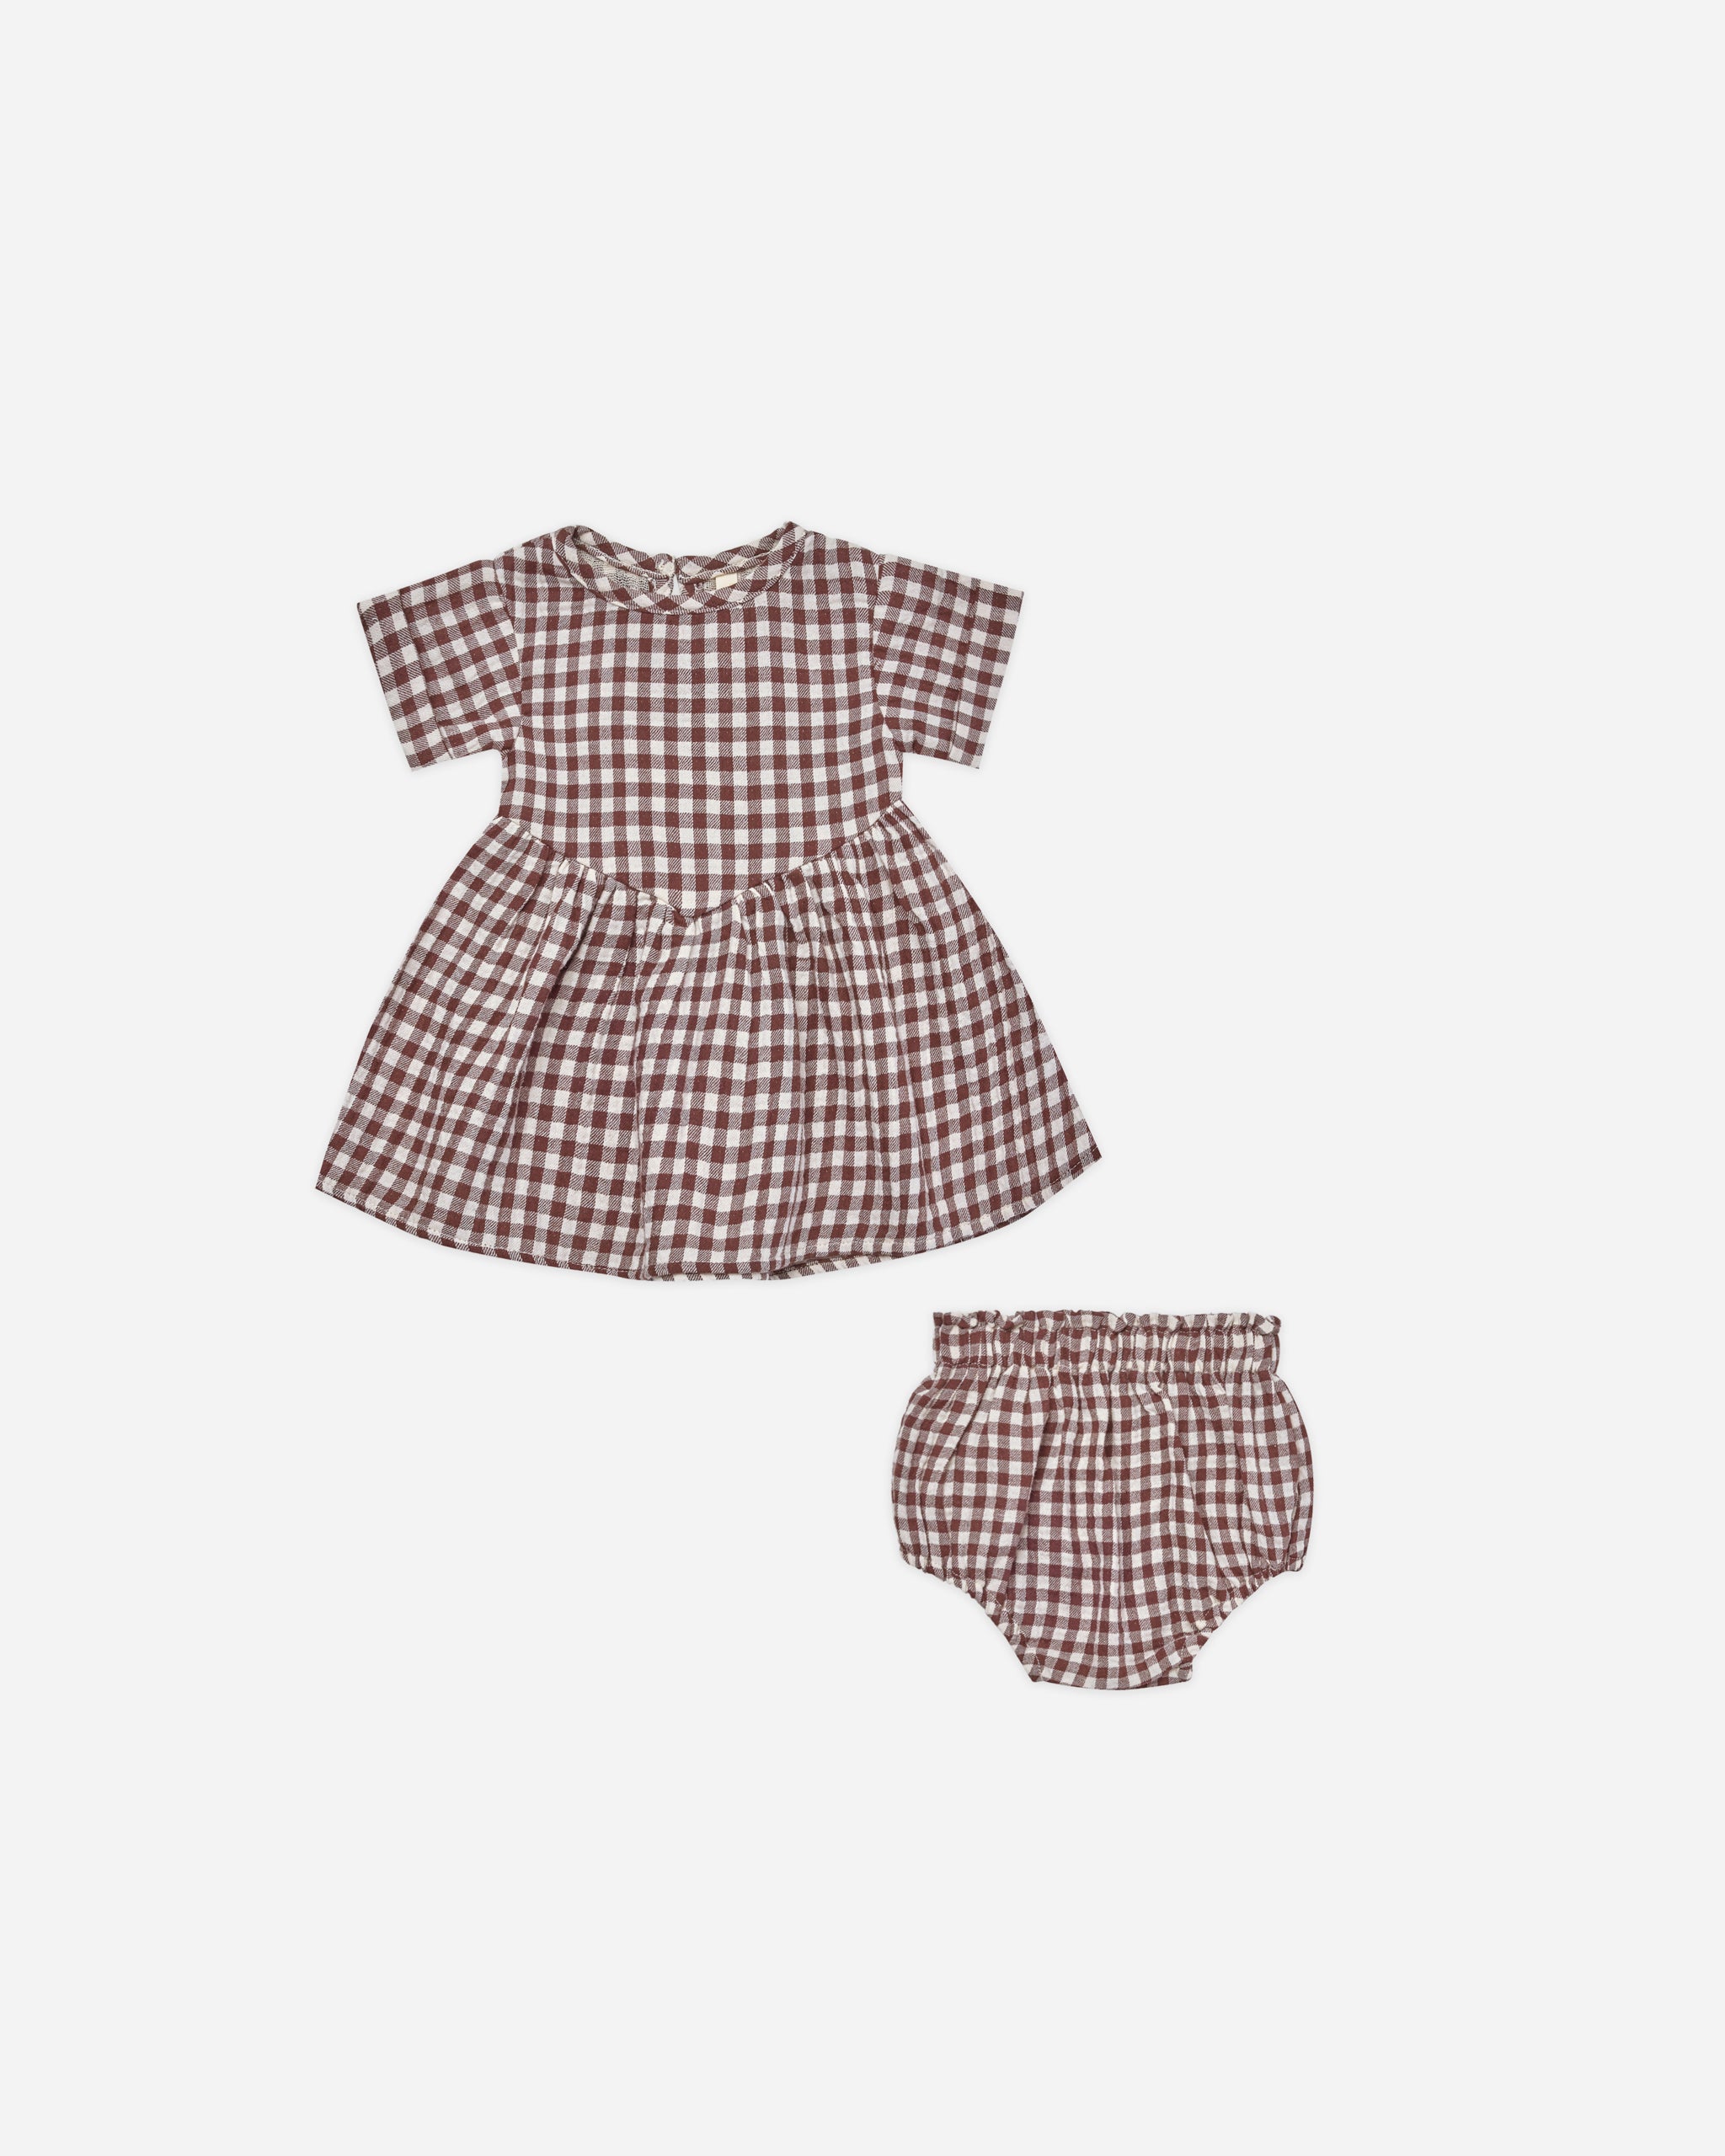 Brielle Dress || Plum Gingham - Rylee + Cru | Kids Clothes | Trendy Baby Clothes | Modern Infant Outfits |